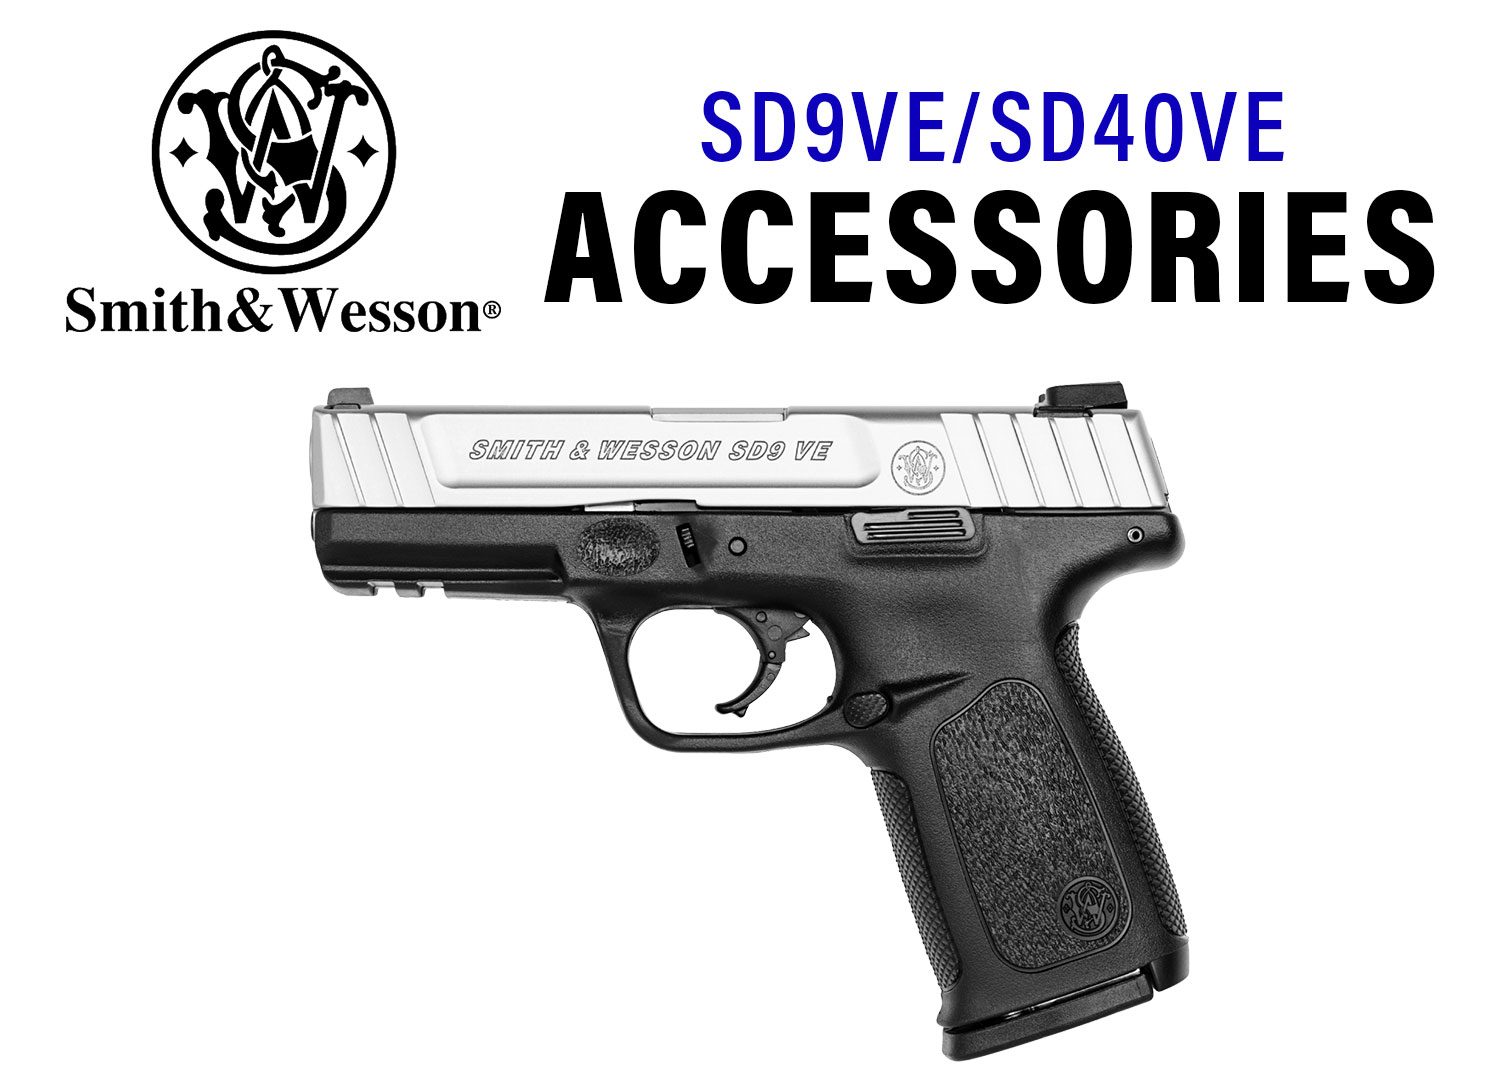 Smith and Wesson SD9VE/SD40VE Accessories